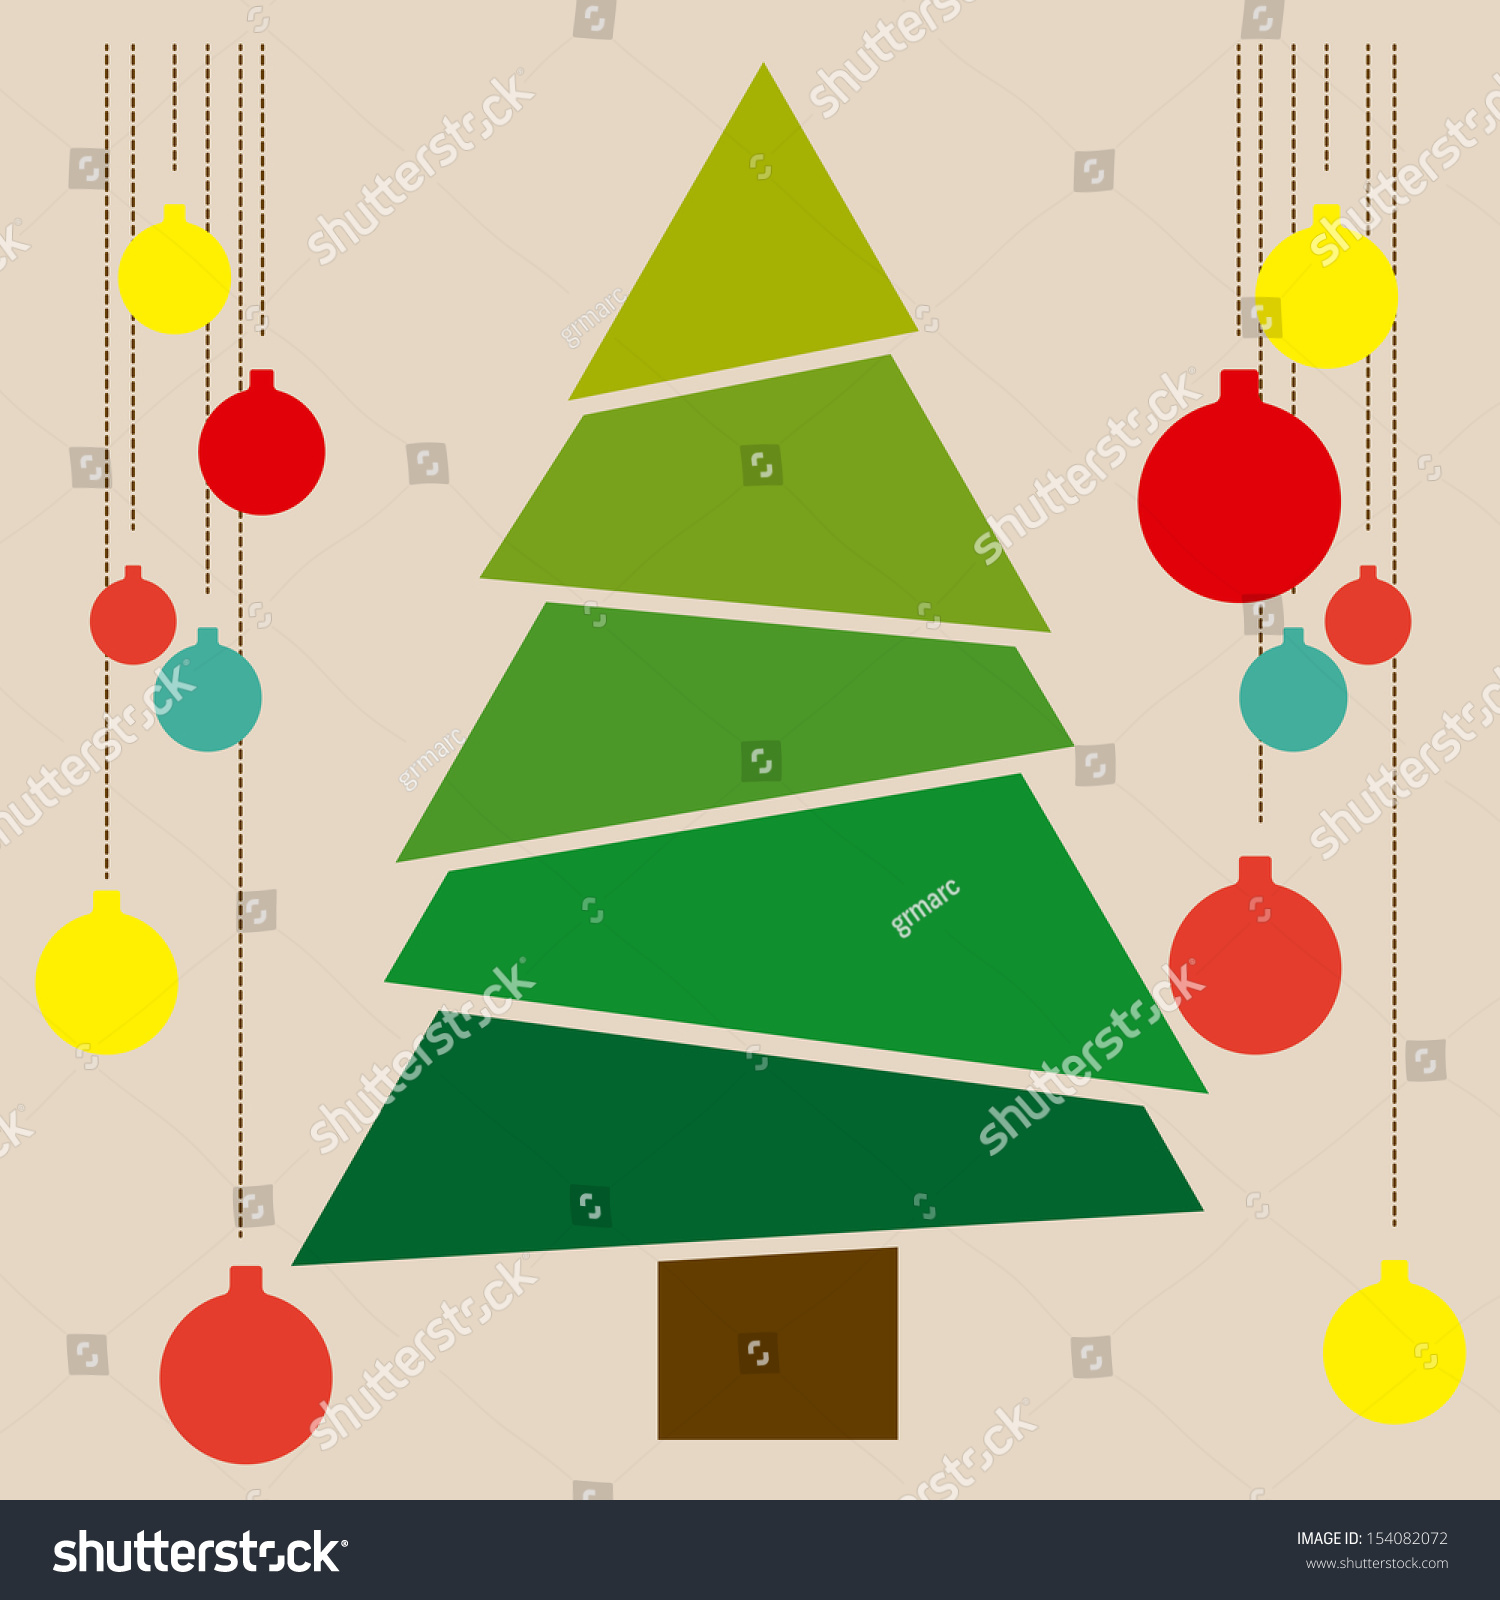 8,001 Colorfull Tree Images, Stock Photos & Vectors | Shutterstock